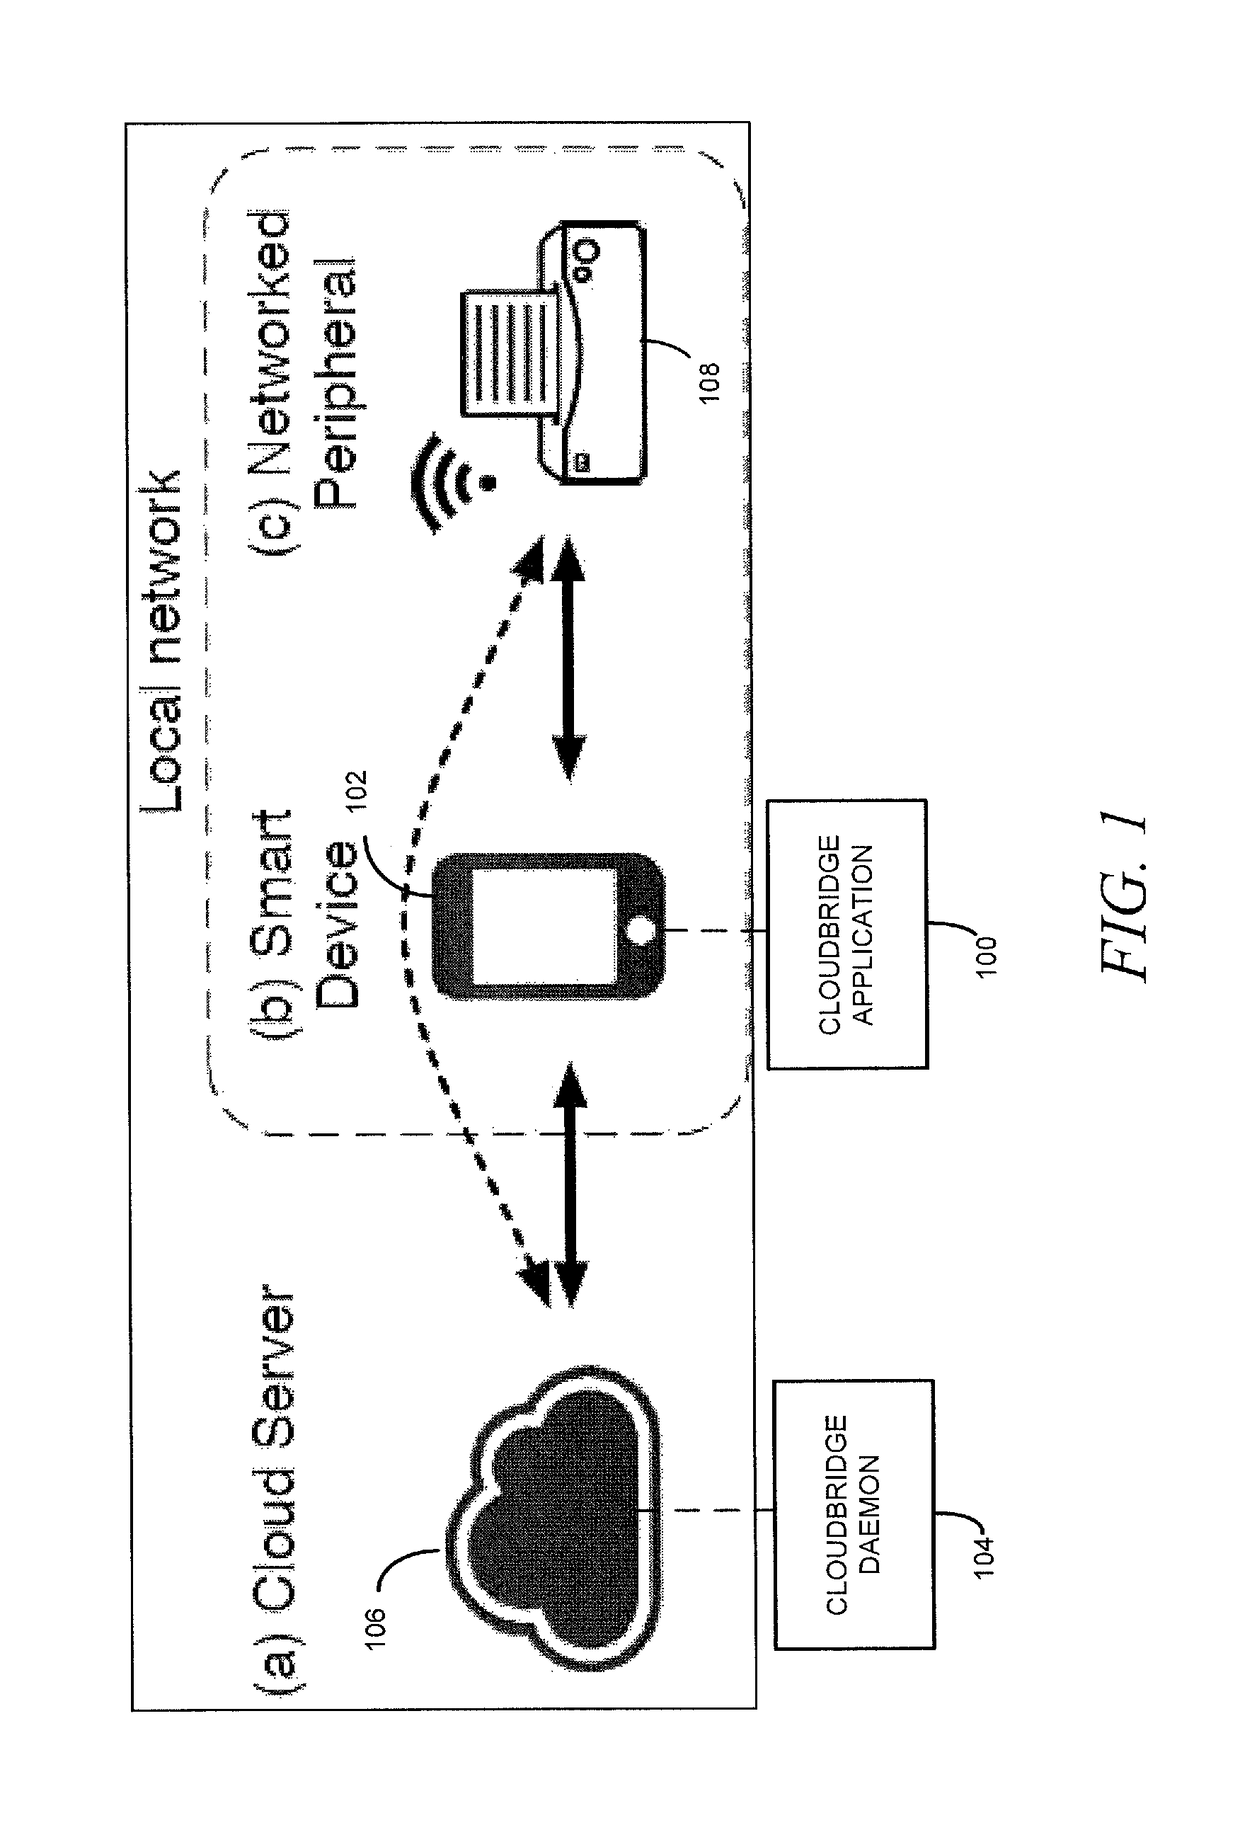 Cloud powered system enabling mobile devices to control peripherals without drivers